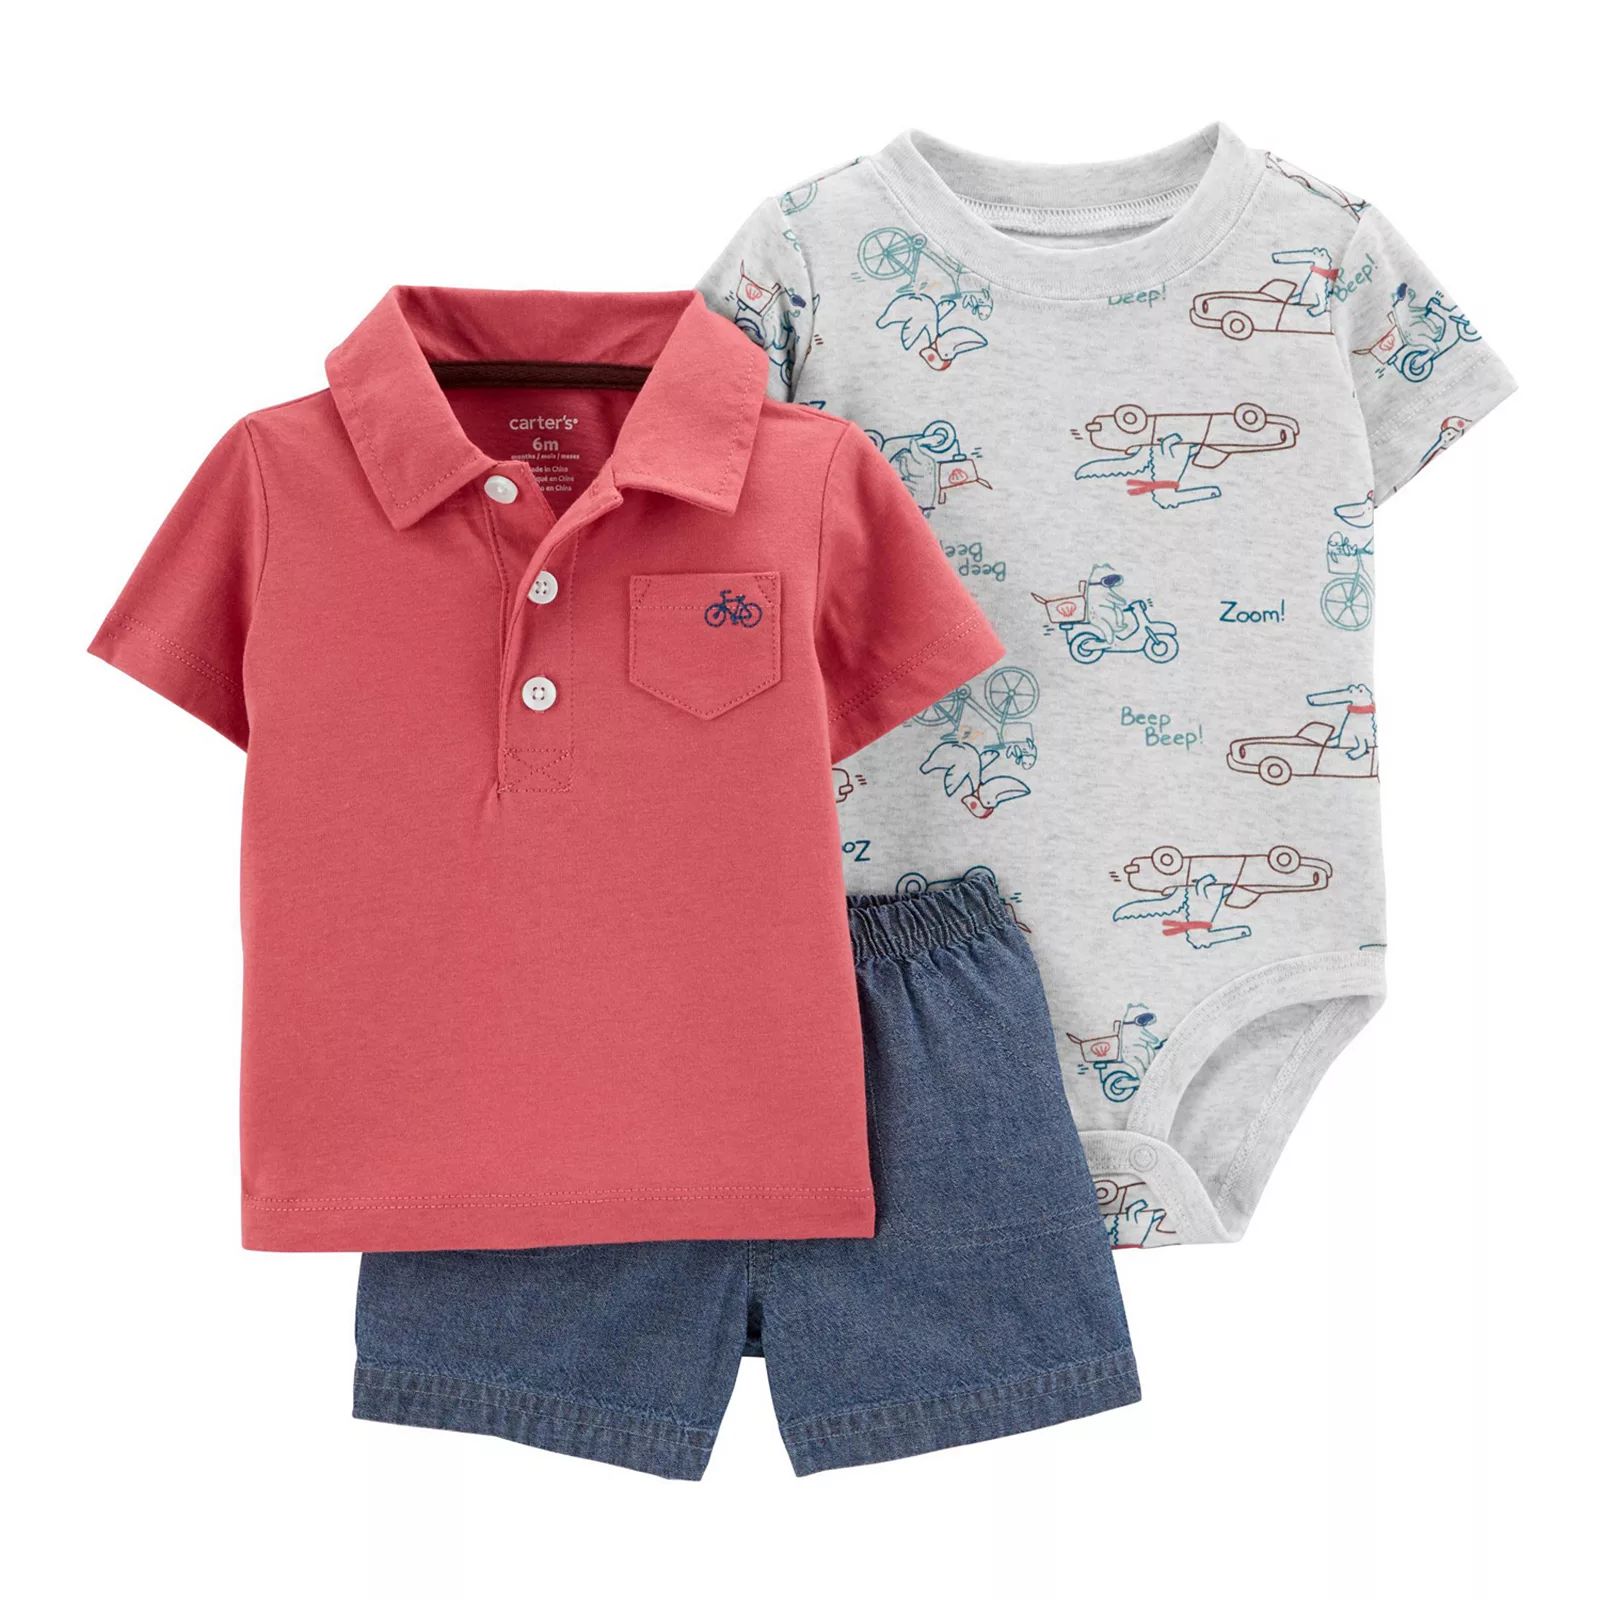 Baby Boy Carter's 3-Piece Polo Little Short Set, Infant Boy's, Size: 9 Months, Red | Kohl's